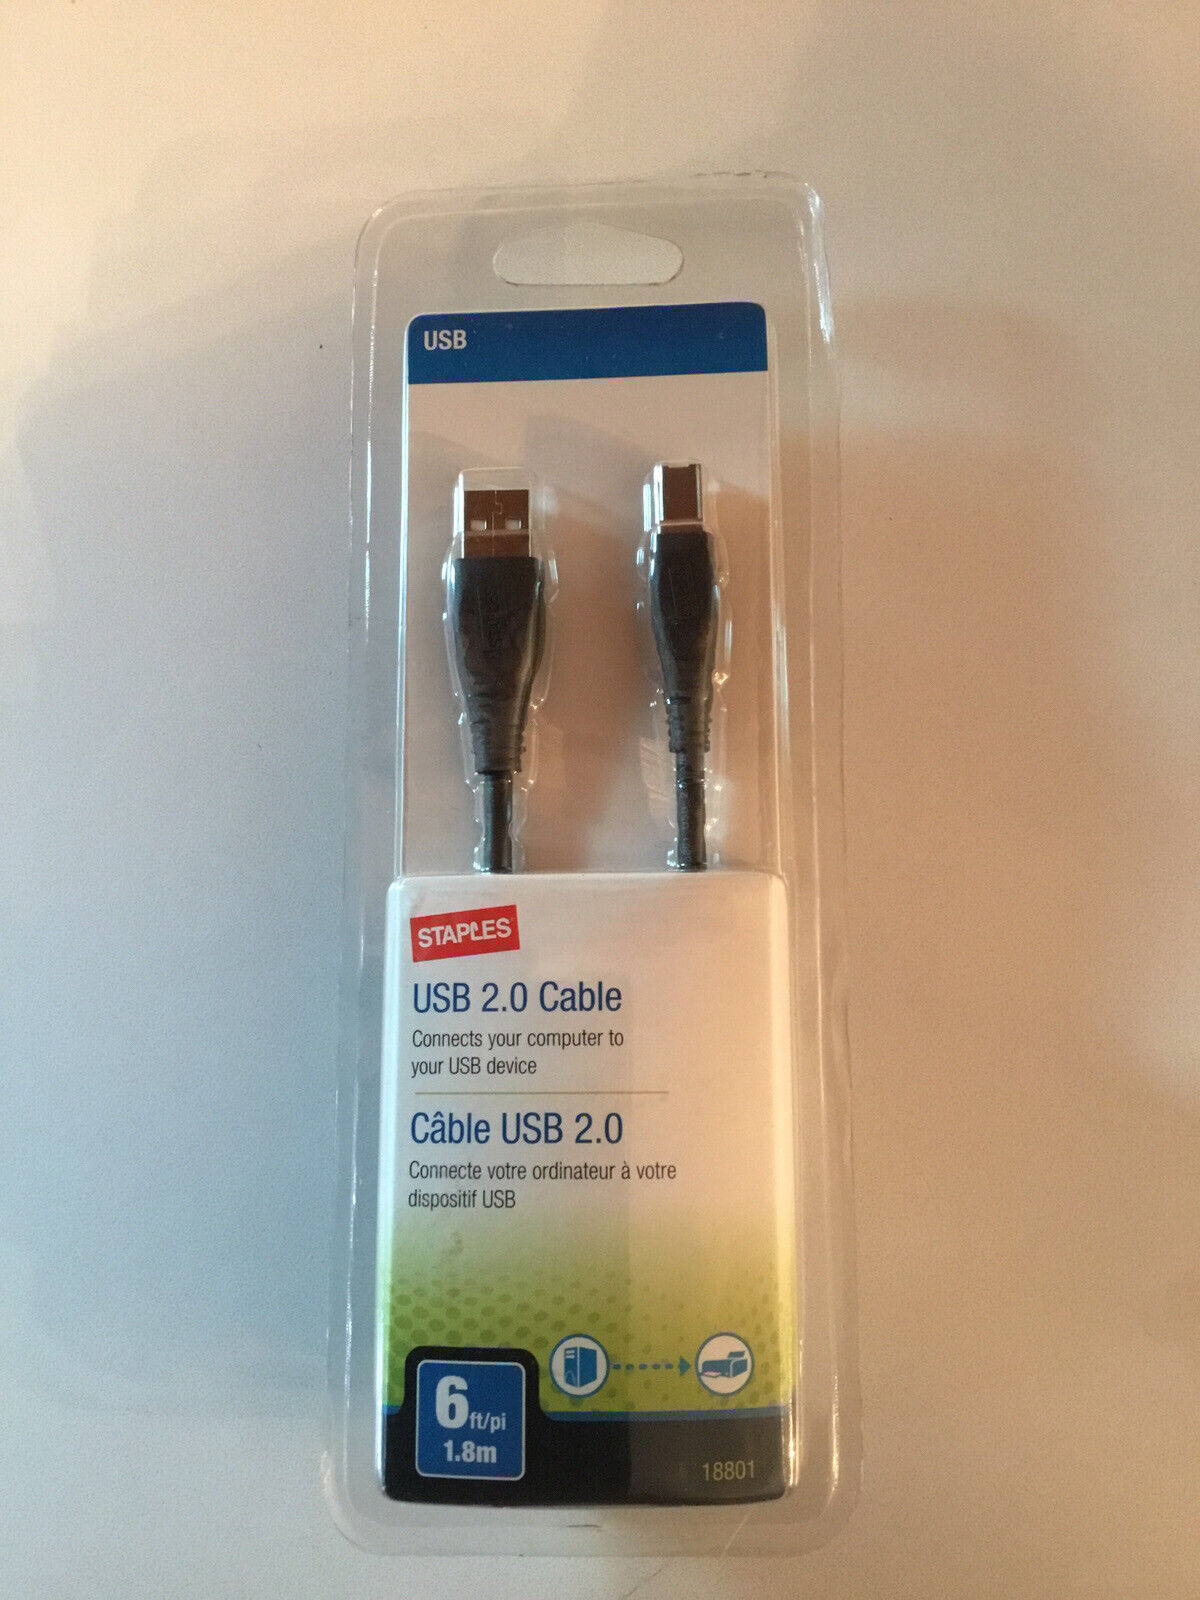 Staples USB 2.0 Cable 18801